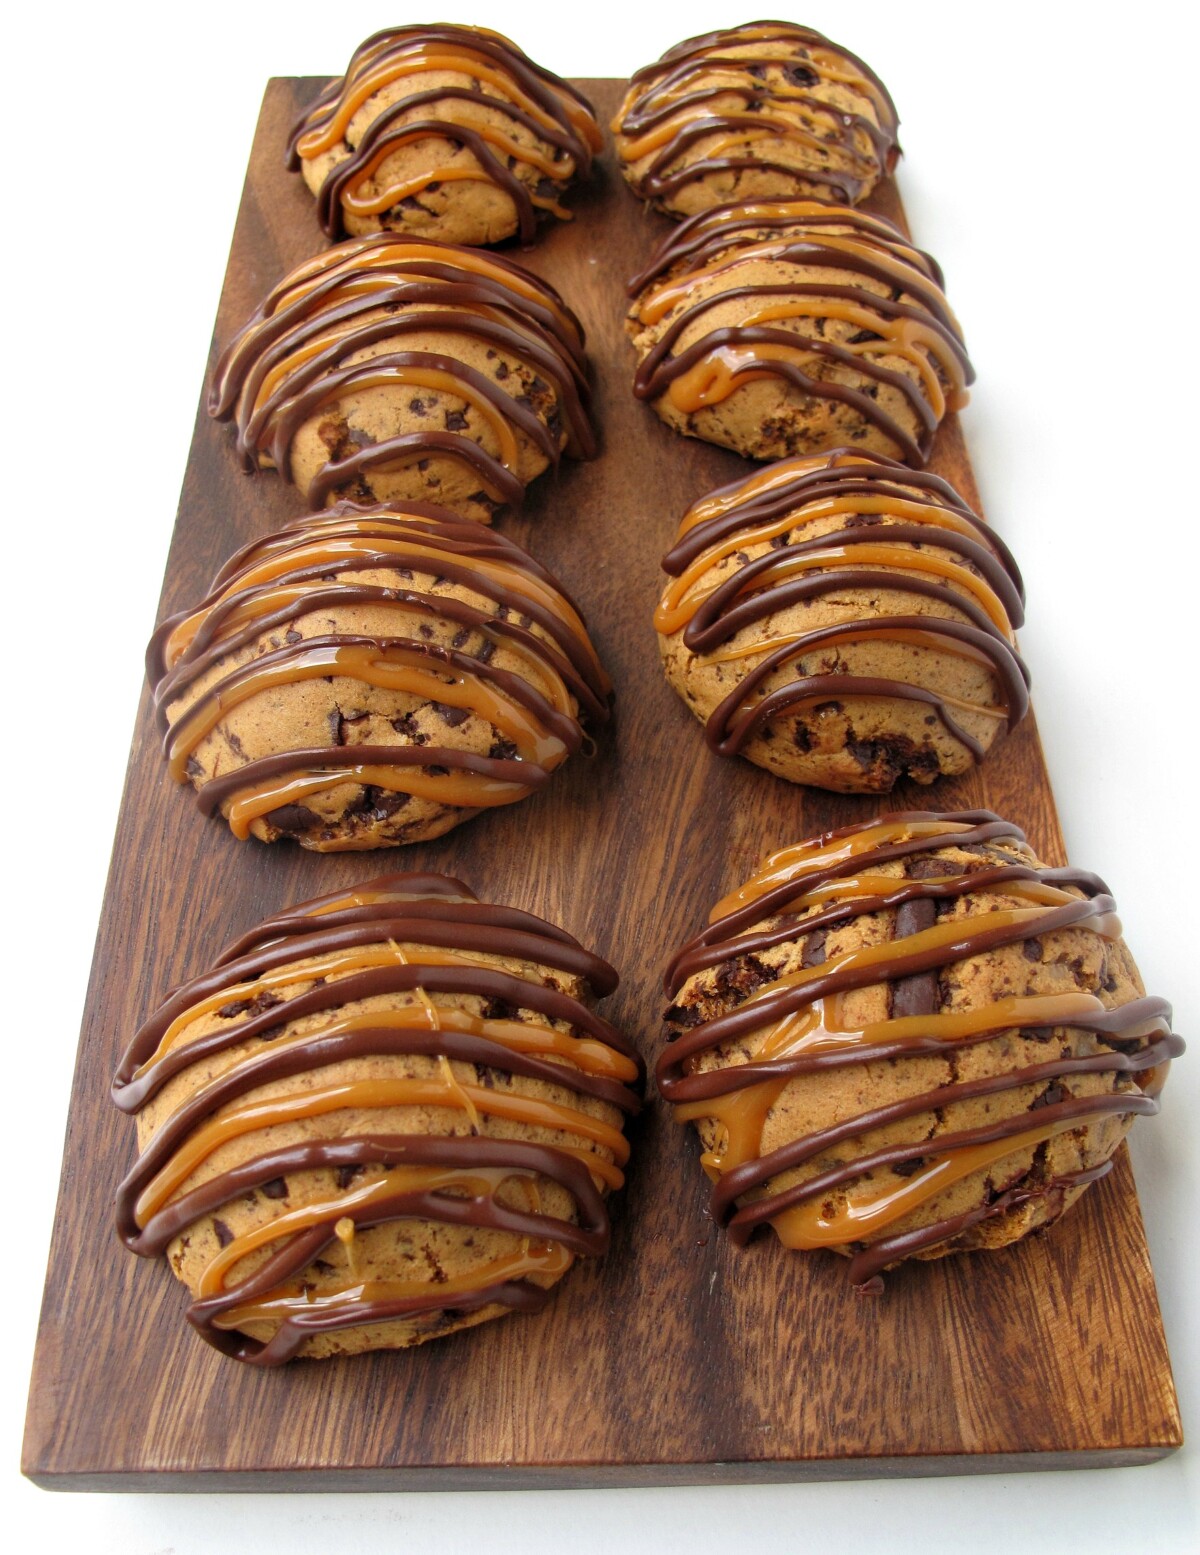 Wooden cutting board with two rows of rounded cookies decorated with chocolate and caramel zigzags.